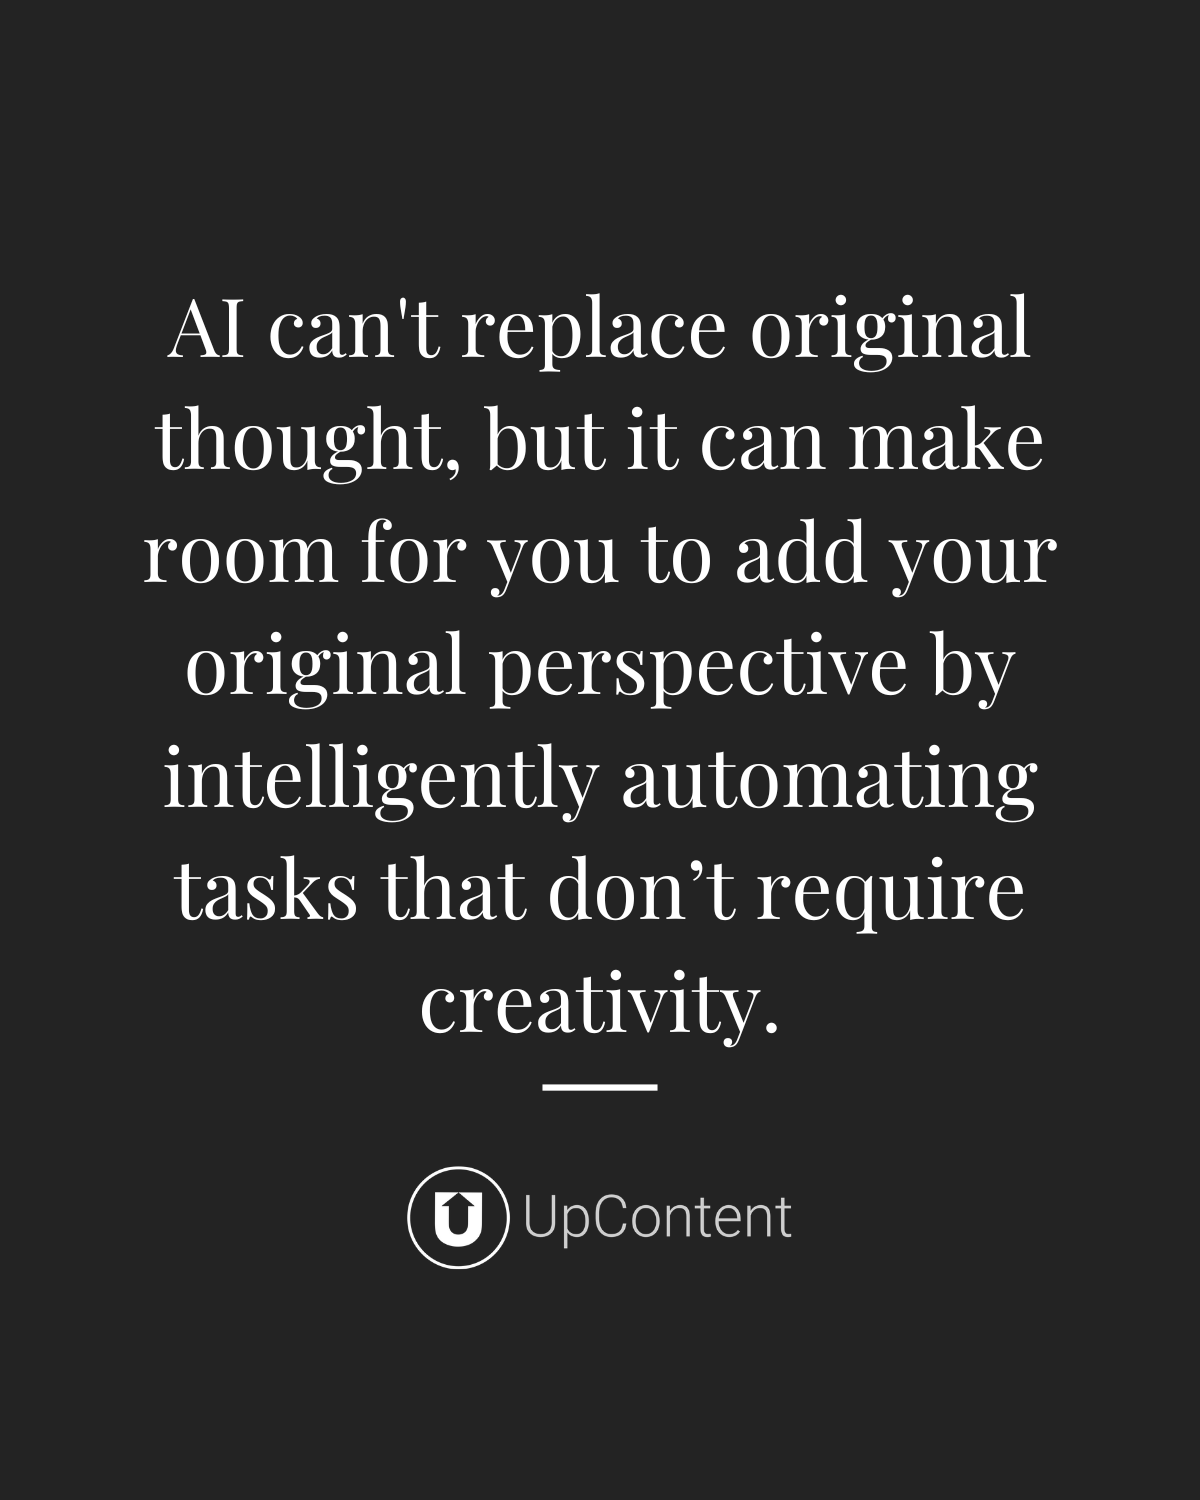 AI can't replace original thought, but it can make room for you to add your original perspective by intelligently automating tasks that don’t require creativity.